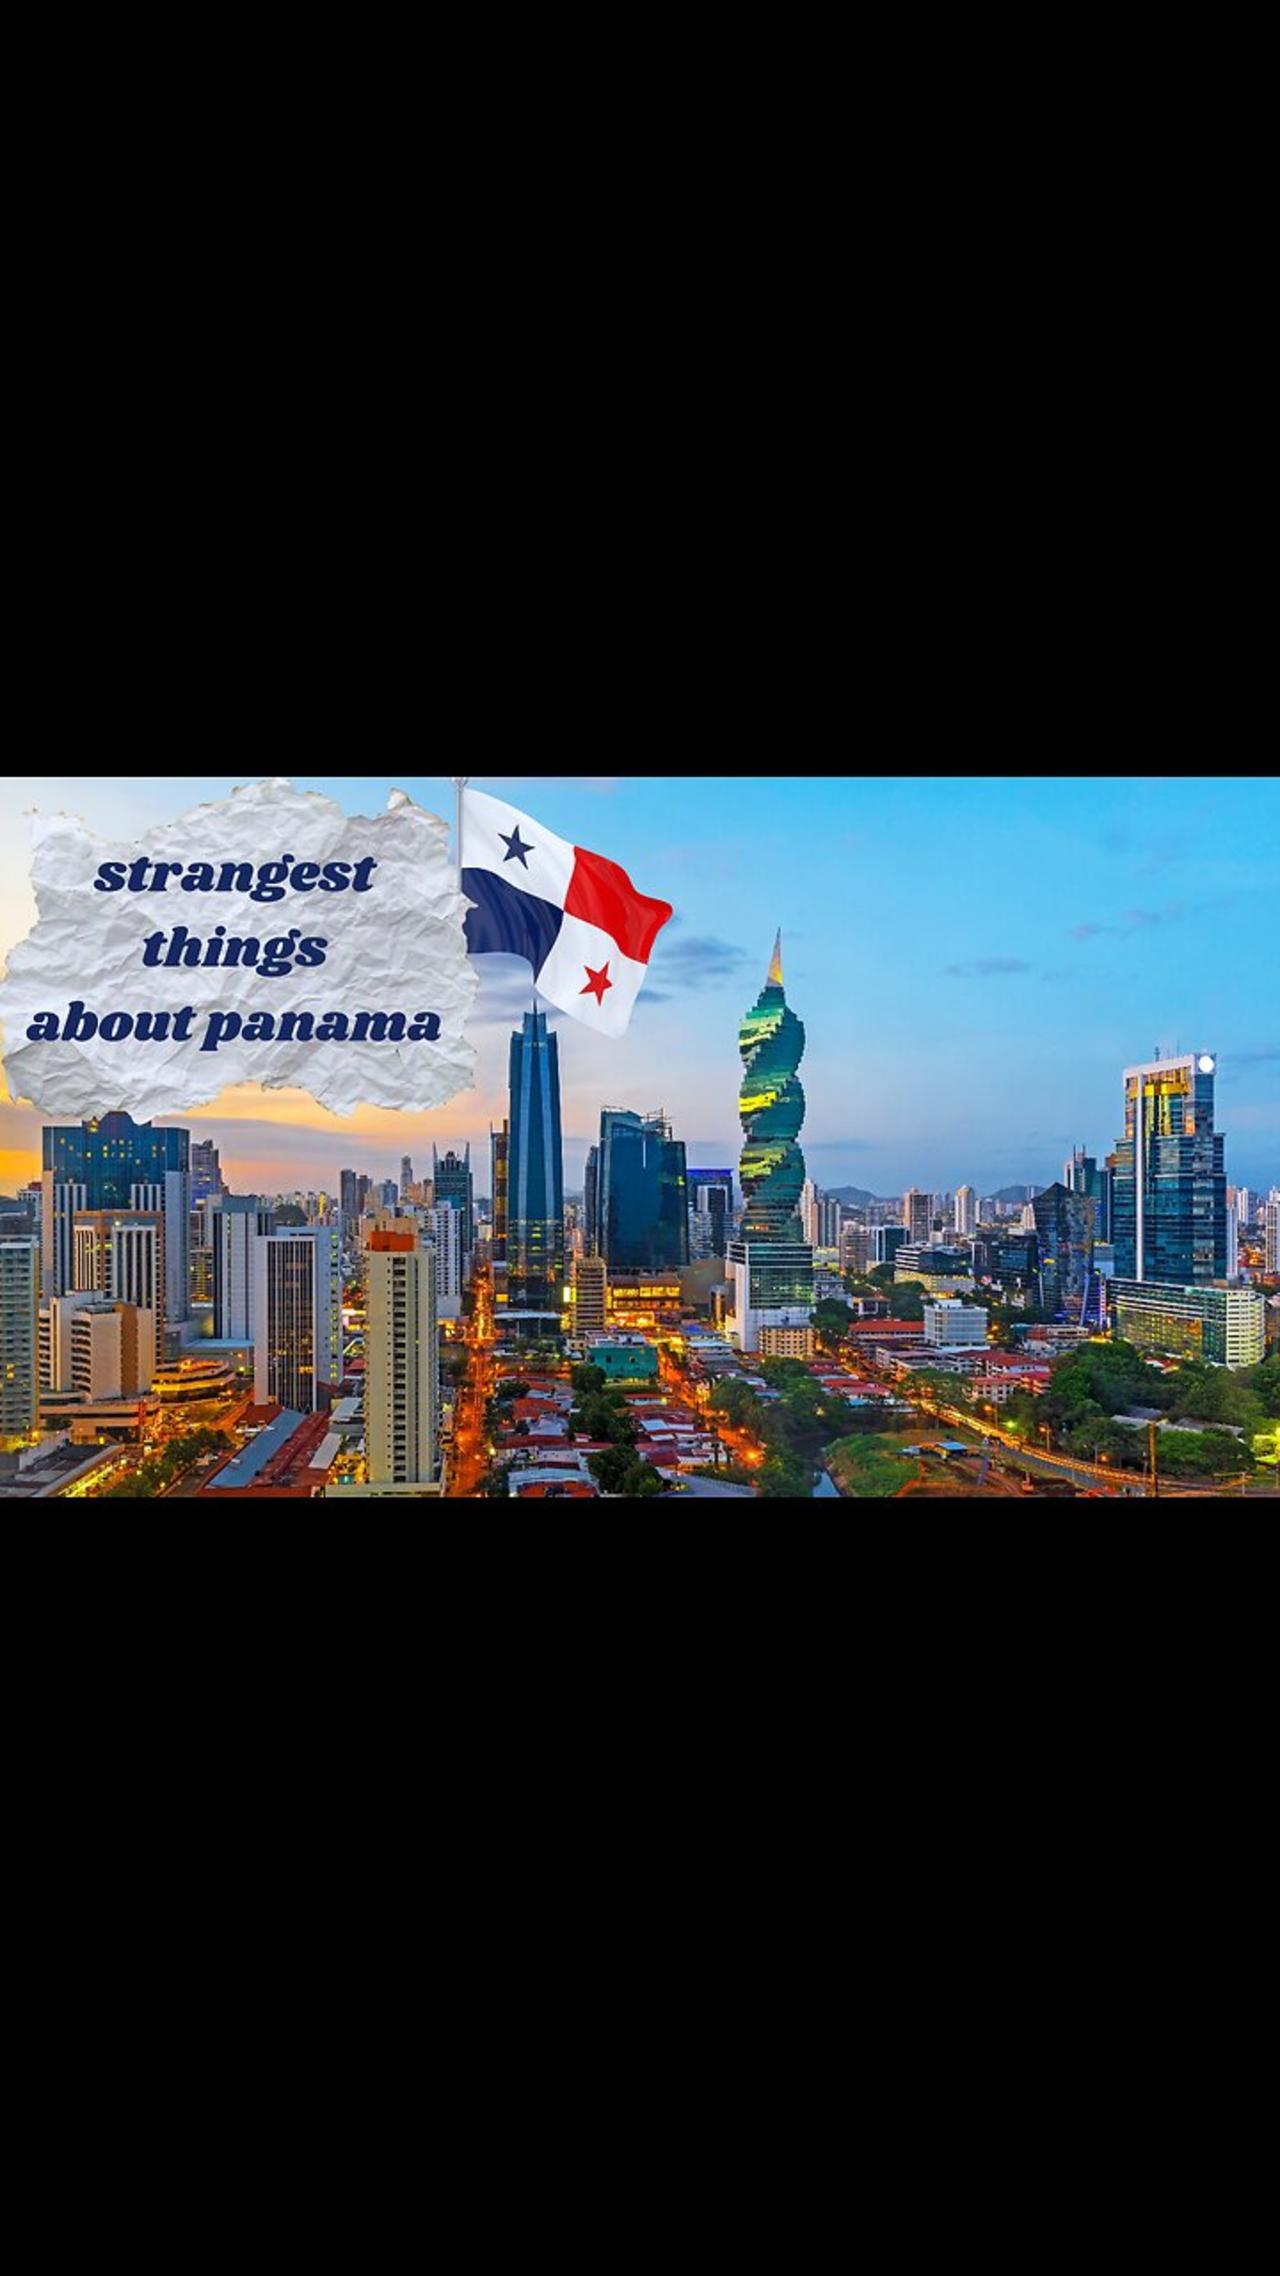 3 strangest things about panama